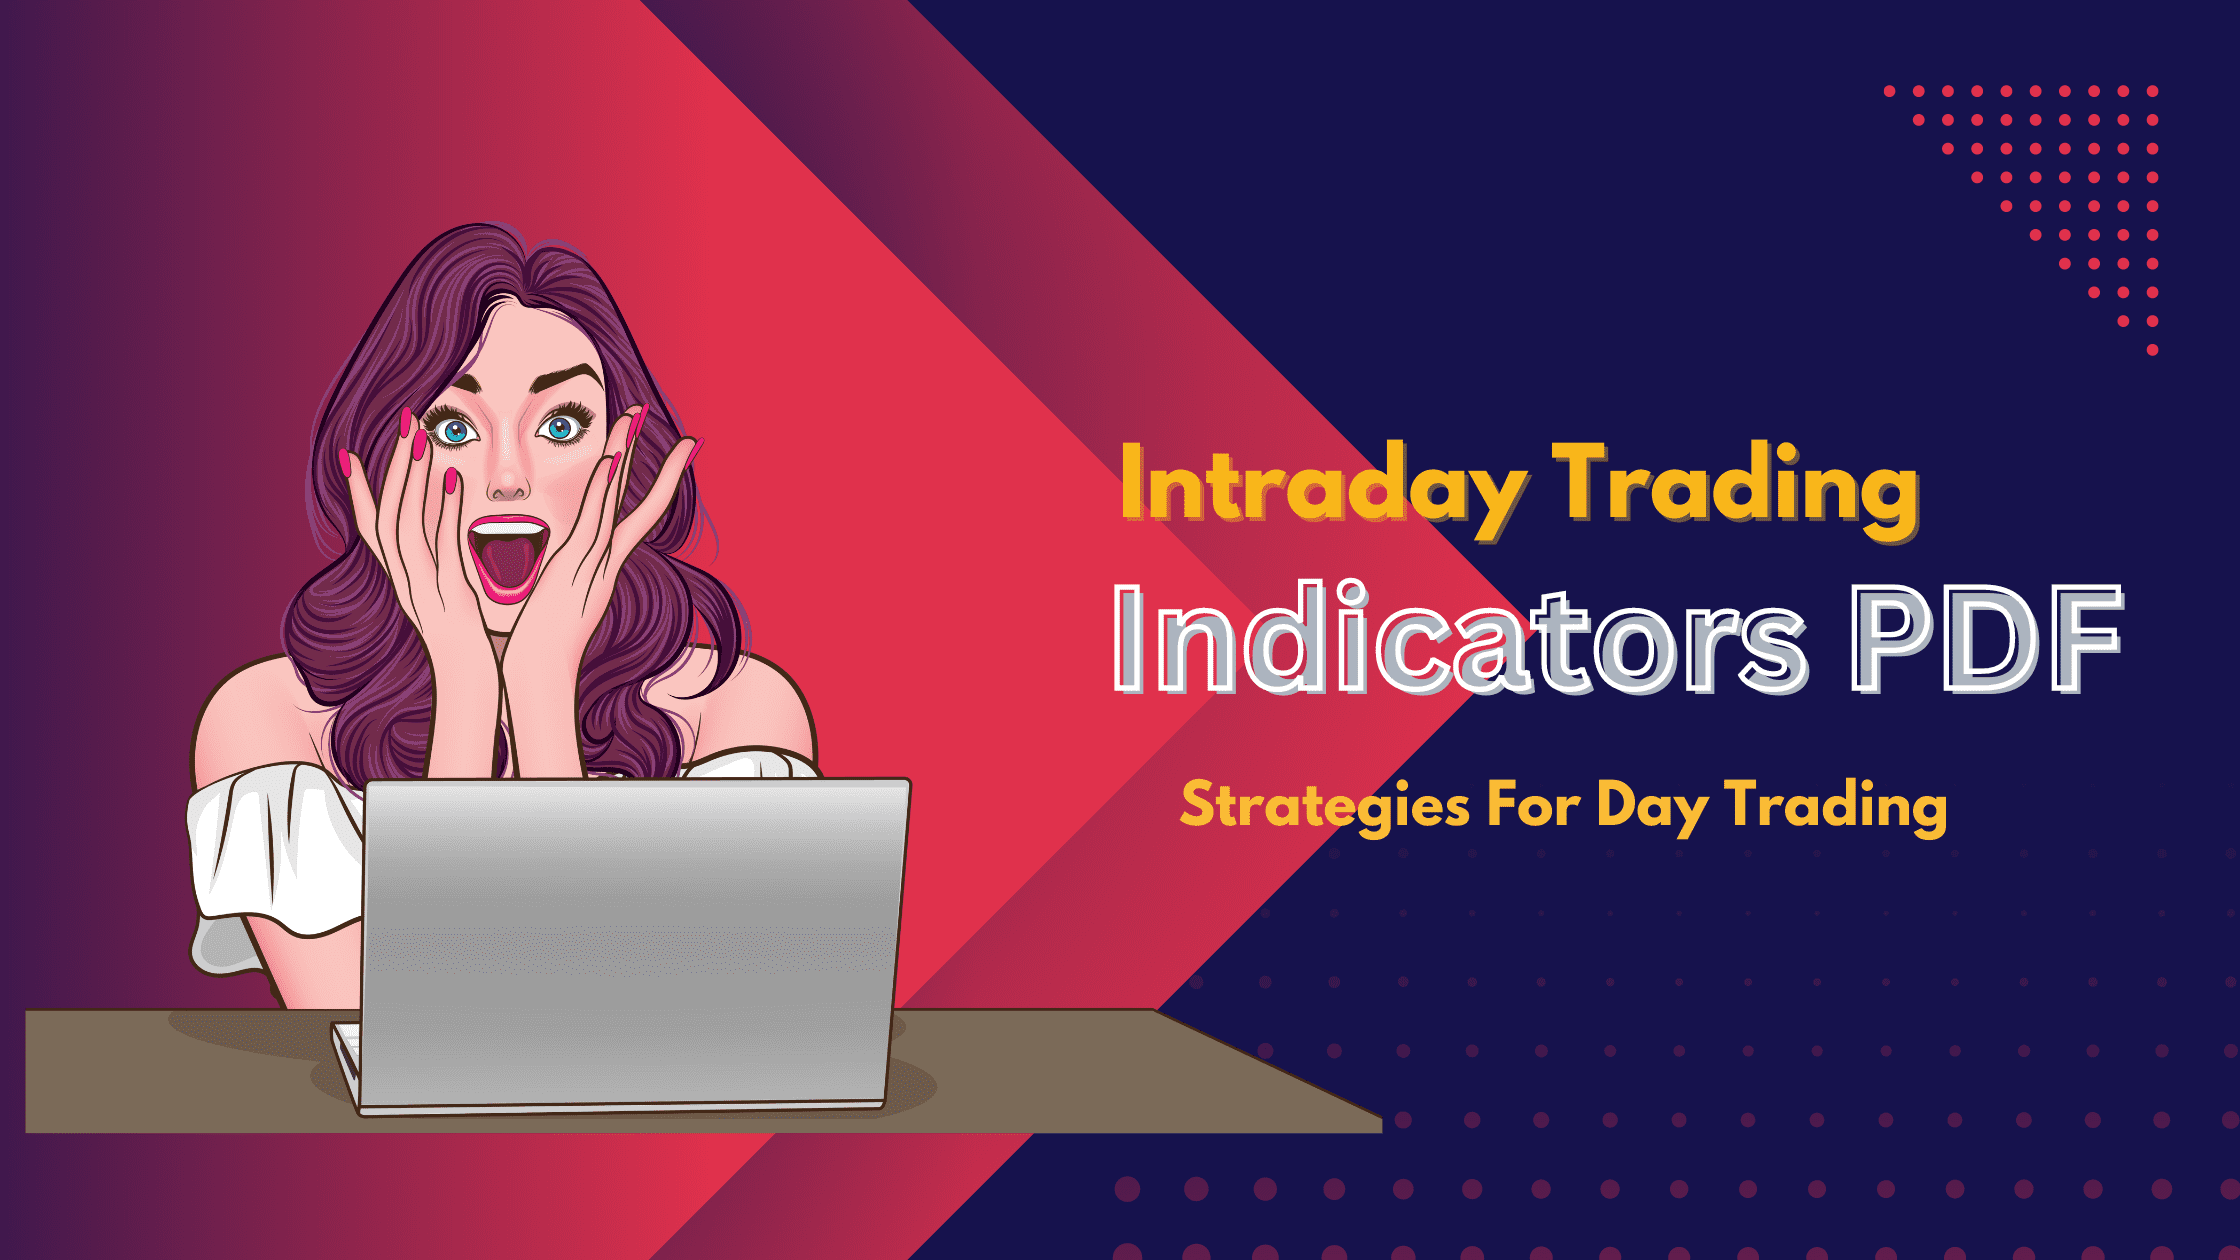 Intraday Trading Indicators PDF Strategies For Day Trading